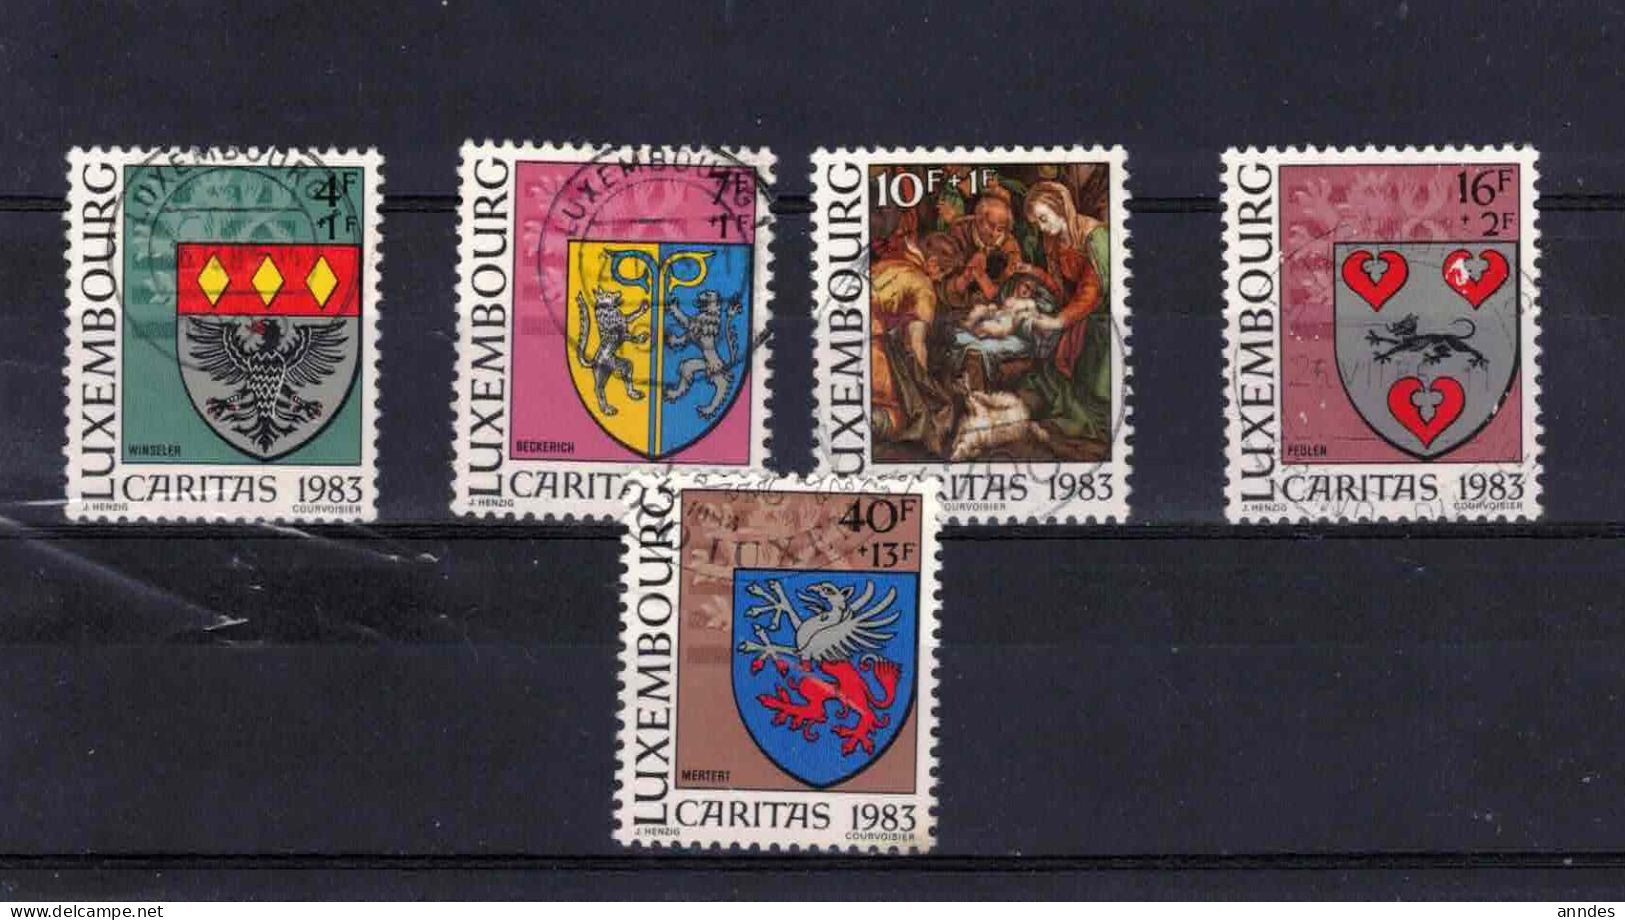 Nrs 1036/40     GESTEMPELD - Used Stamps